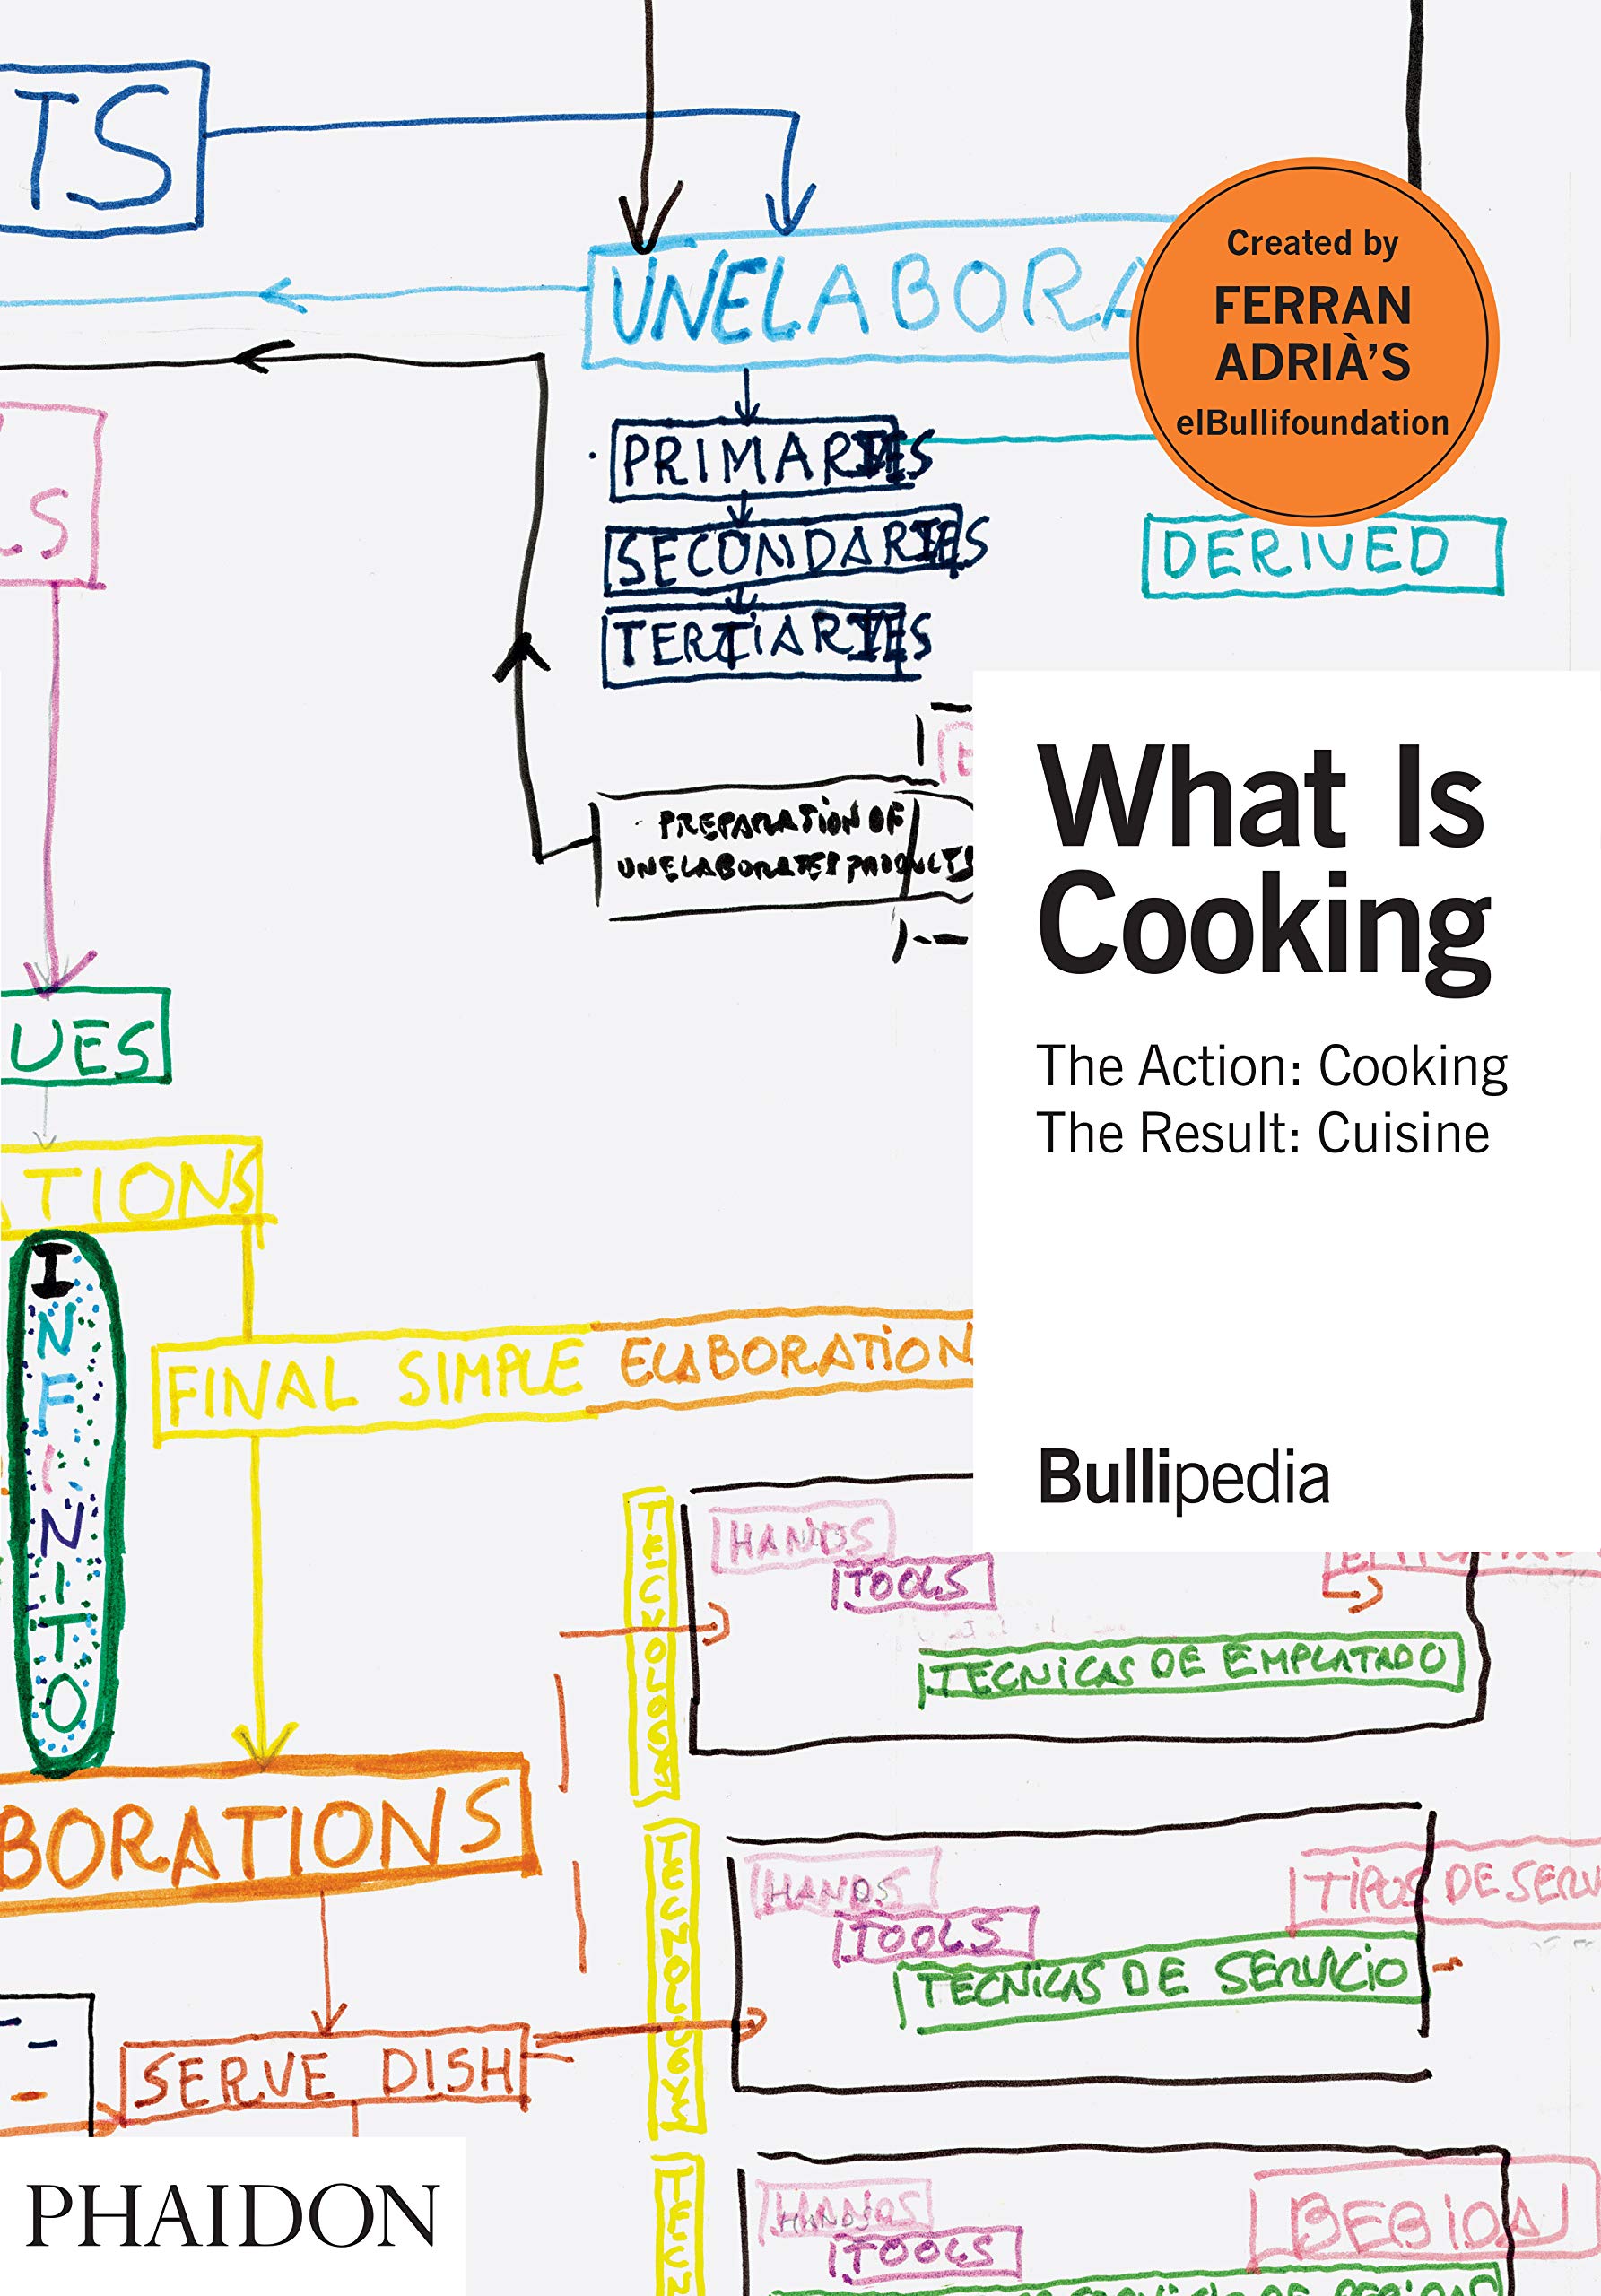 What is Cooking | Ferran Adria